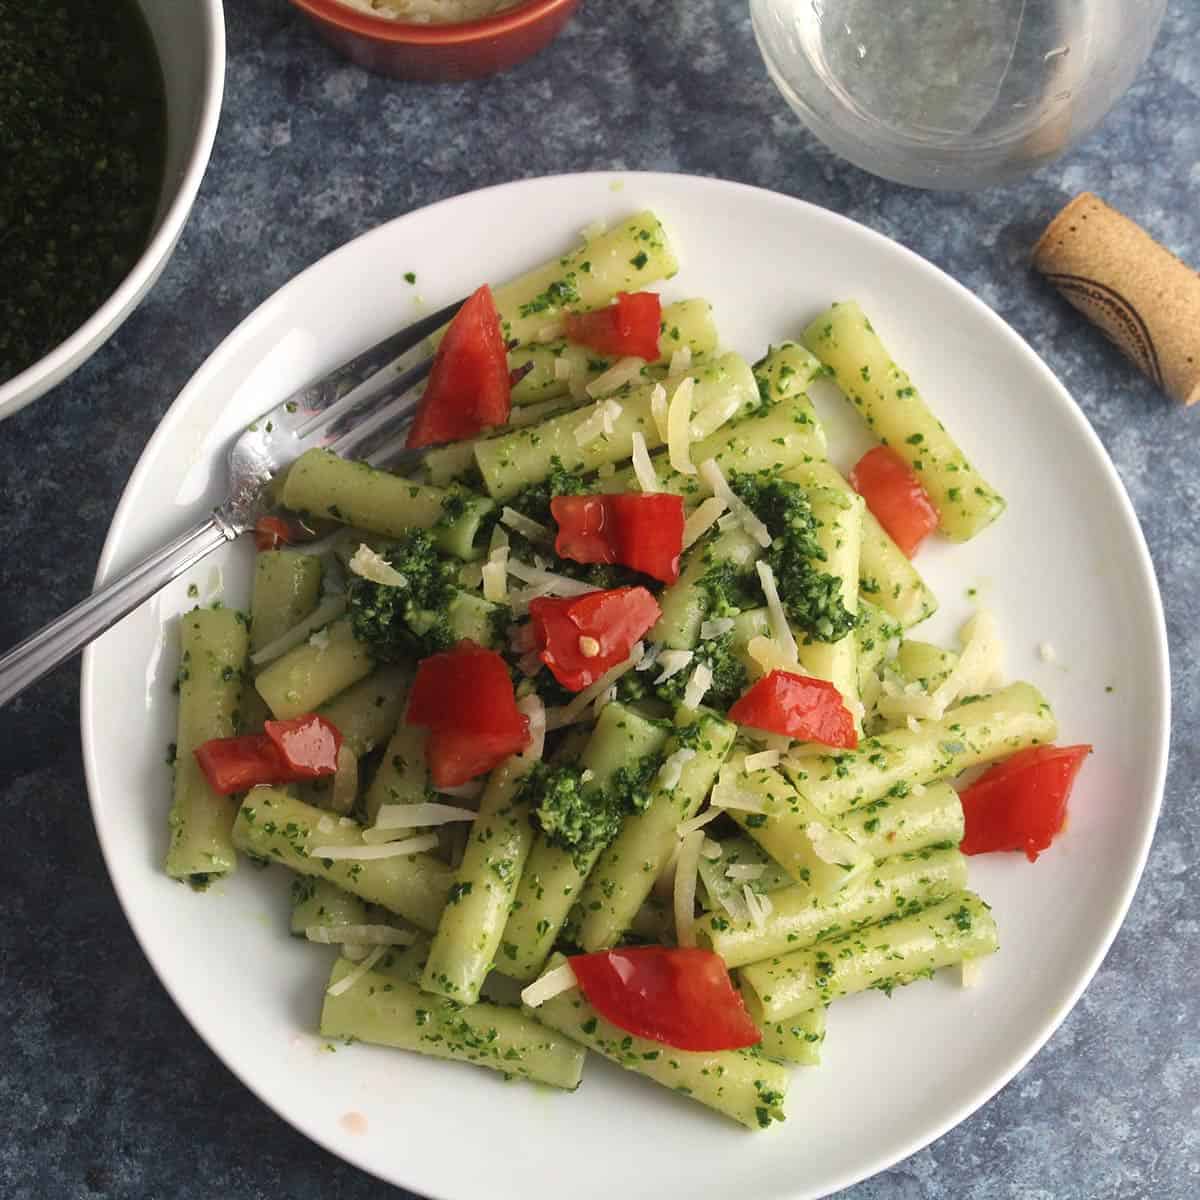 pasta tossed with kale pesto and topped with tomatoes